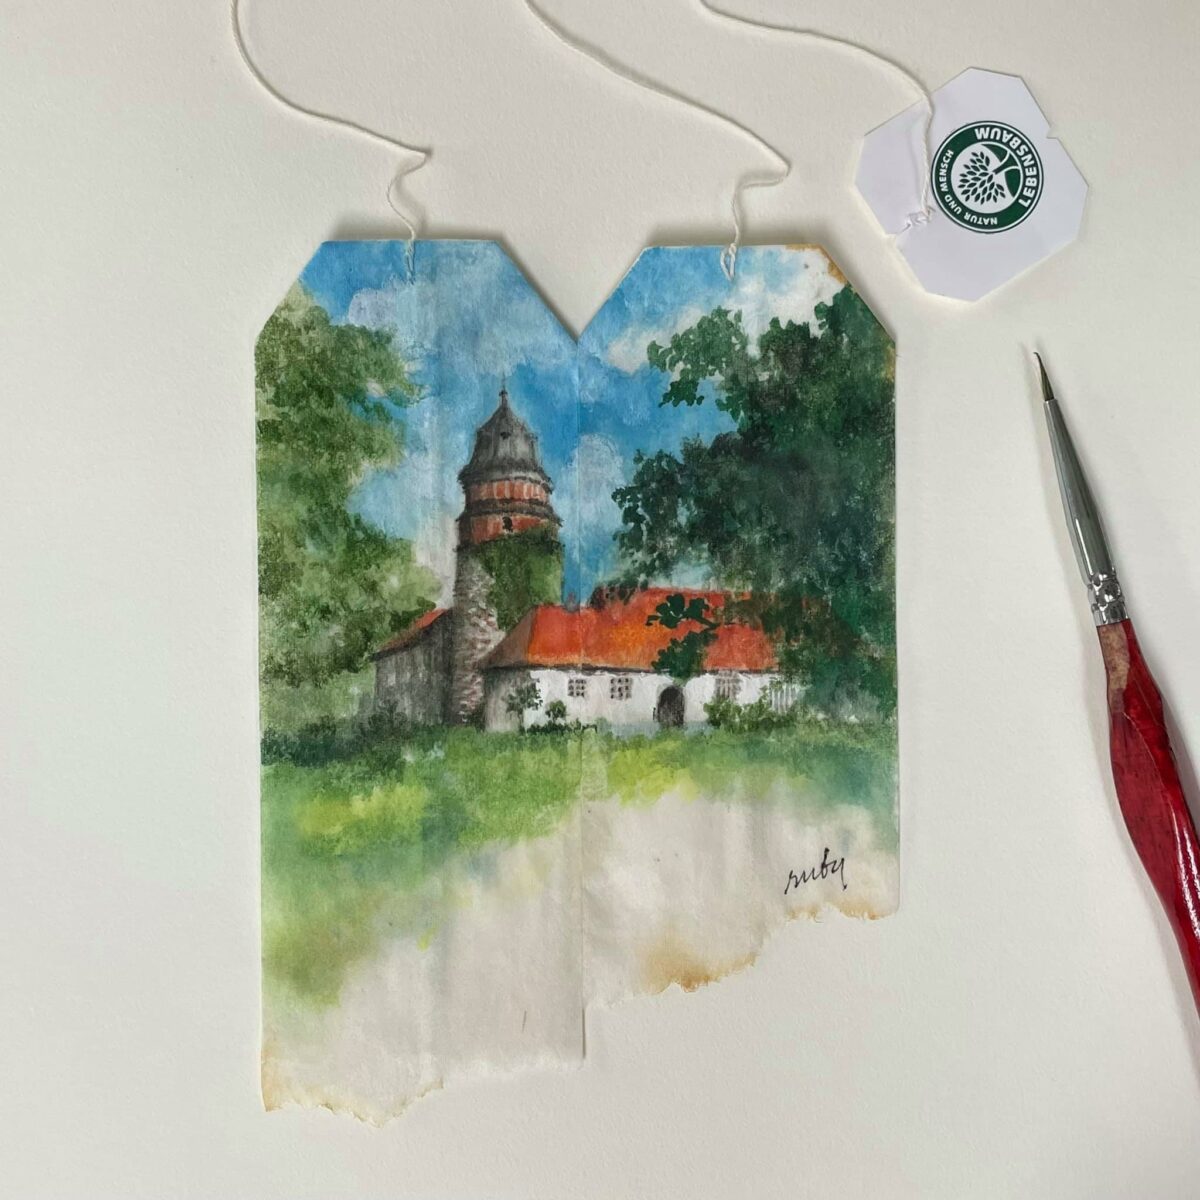 Gorgeous Miniature Watercolors Painted On Used Teabags By Ruby Silvious 2